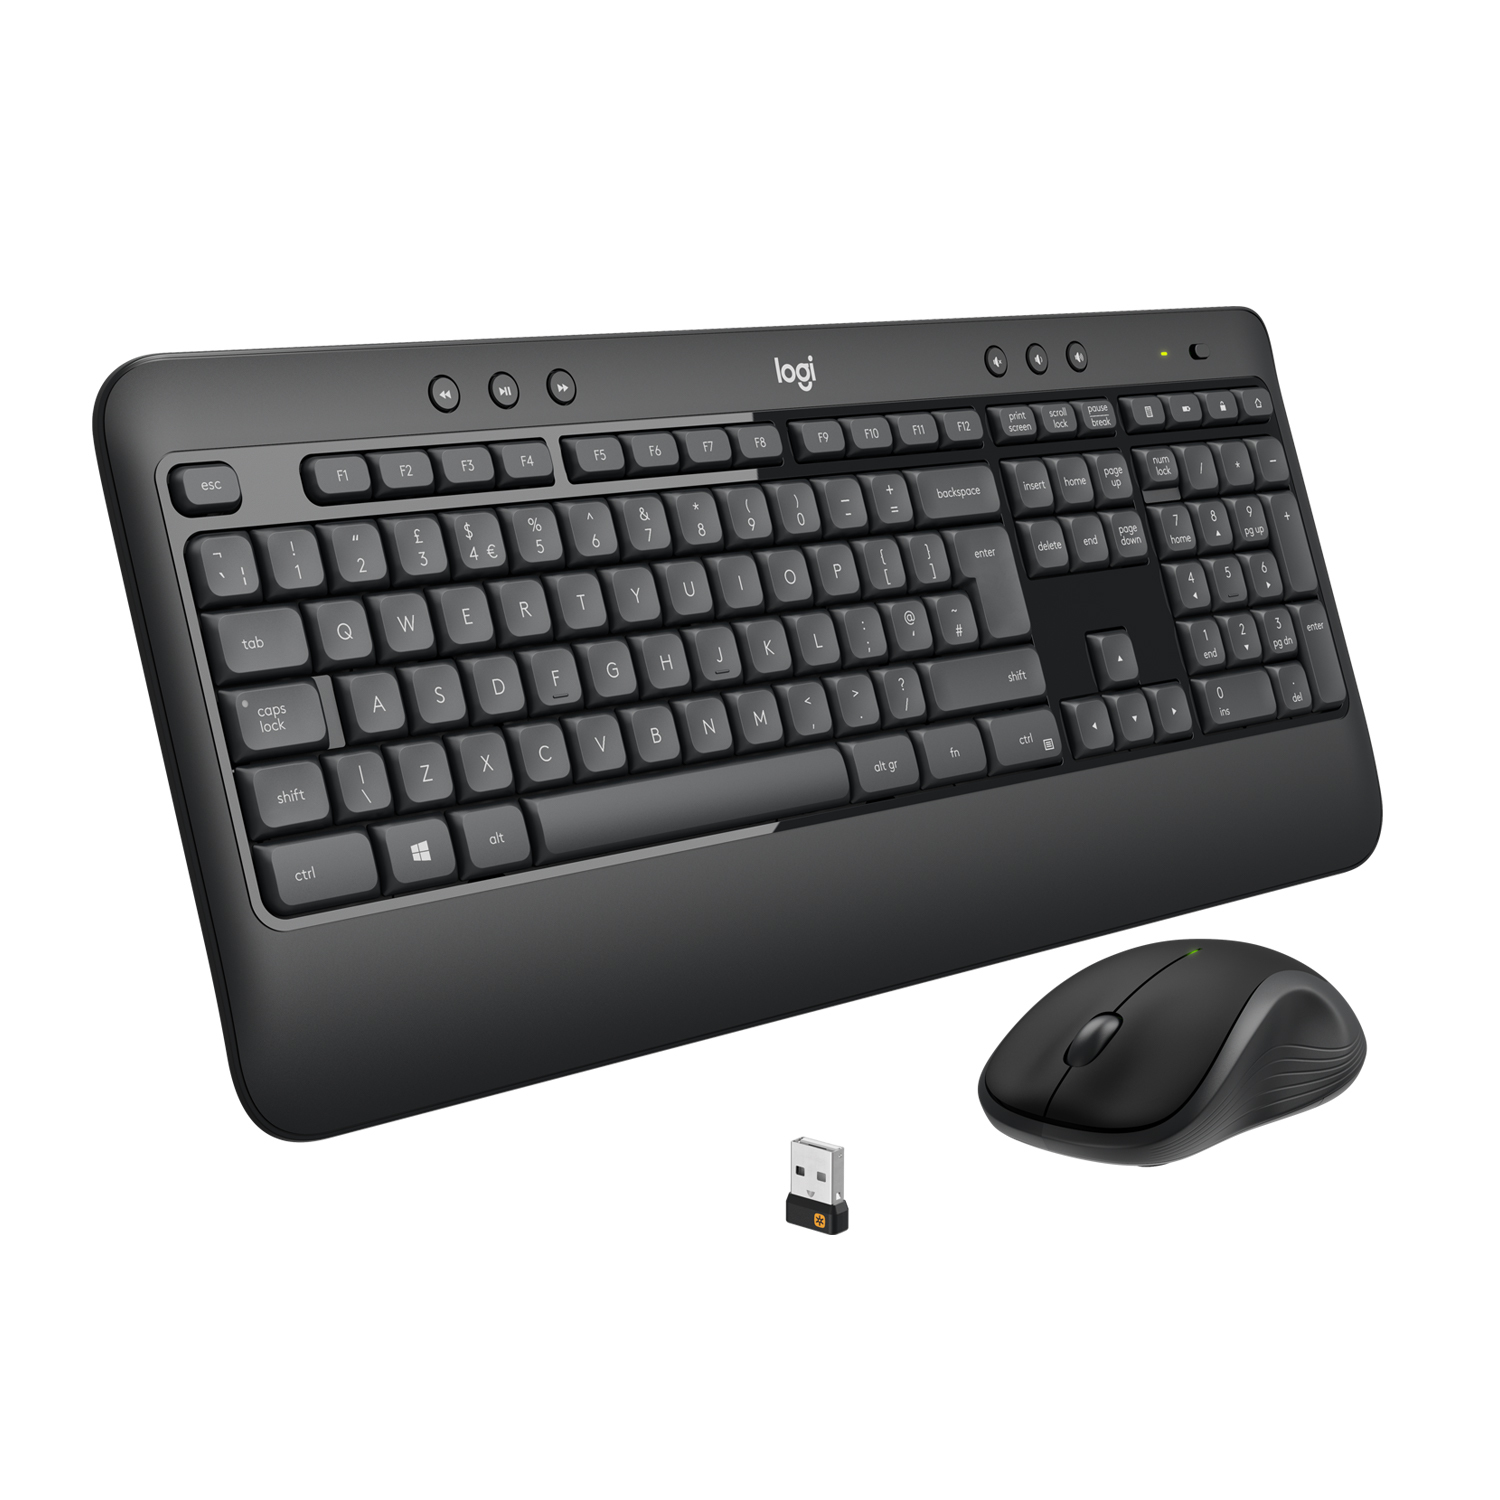 MK540 ADVANCED Wireless Keyboard and Mouse Combo - US INTL - INTNL QWERTY